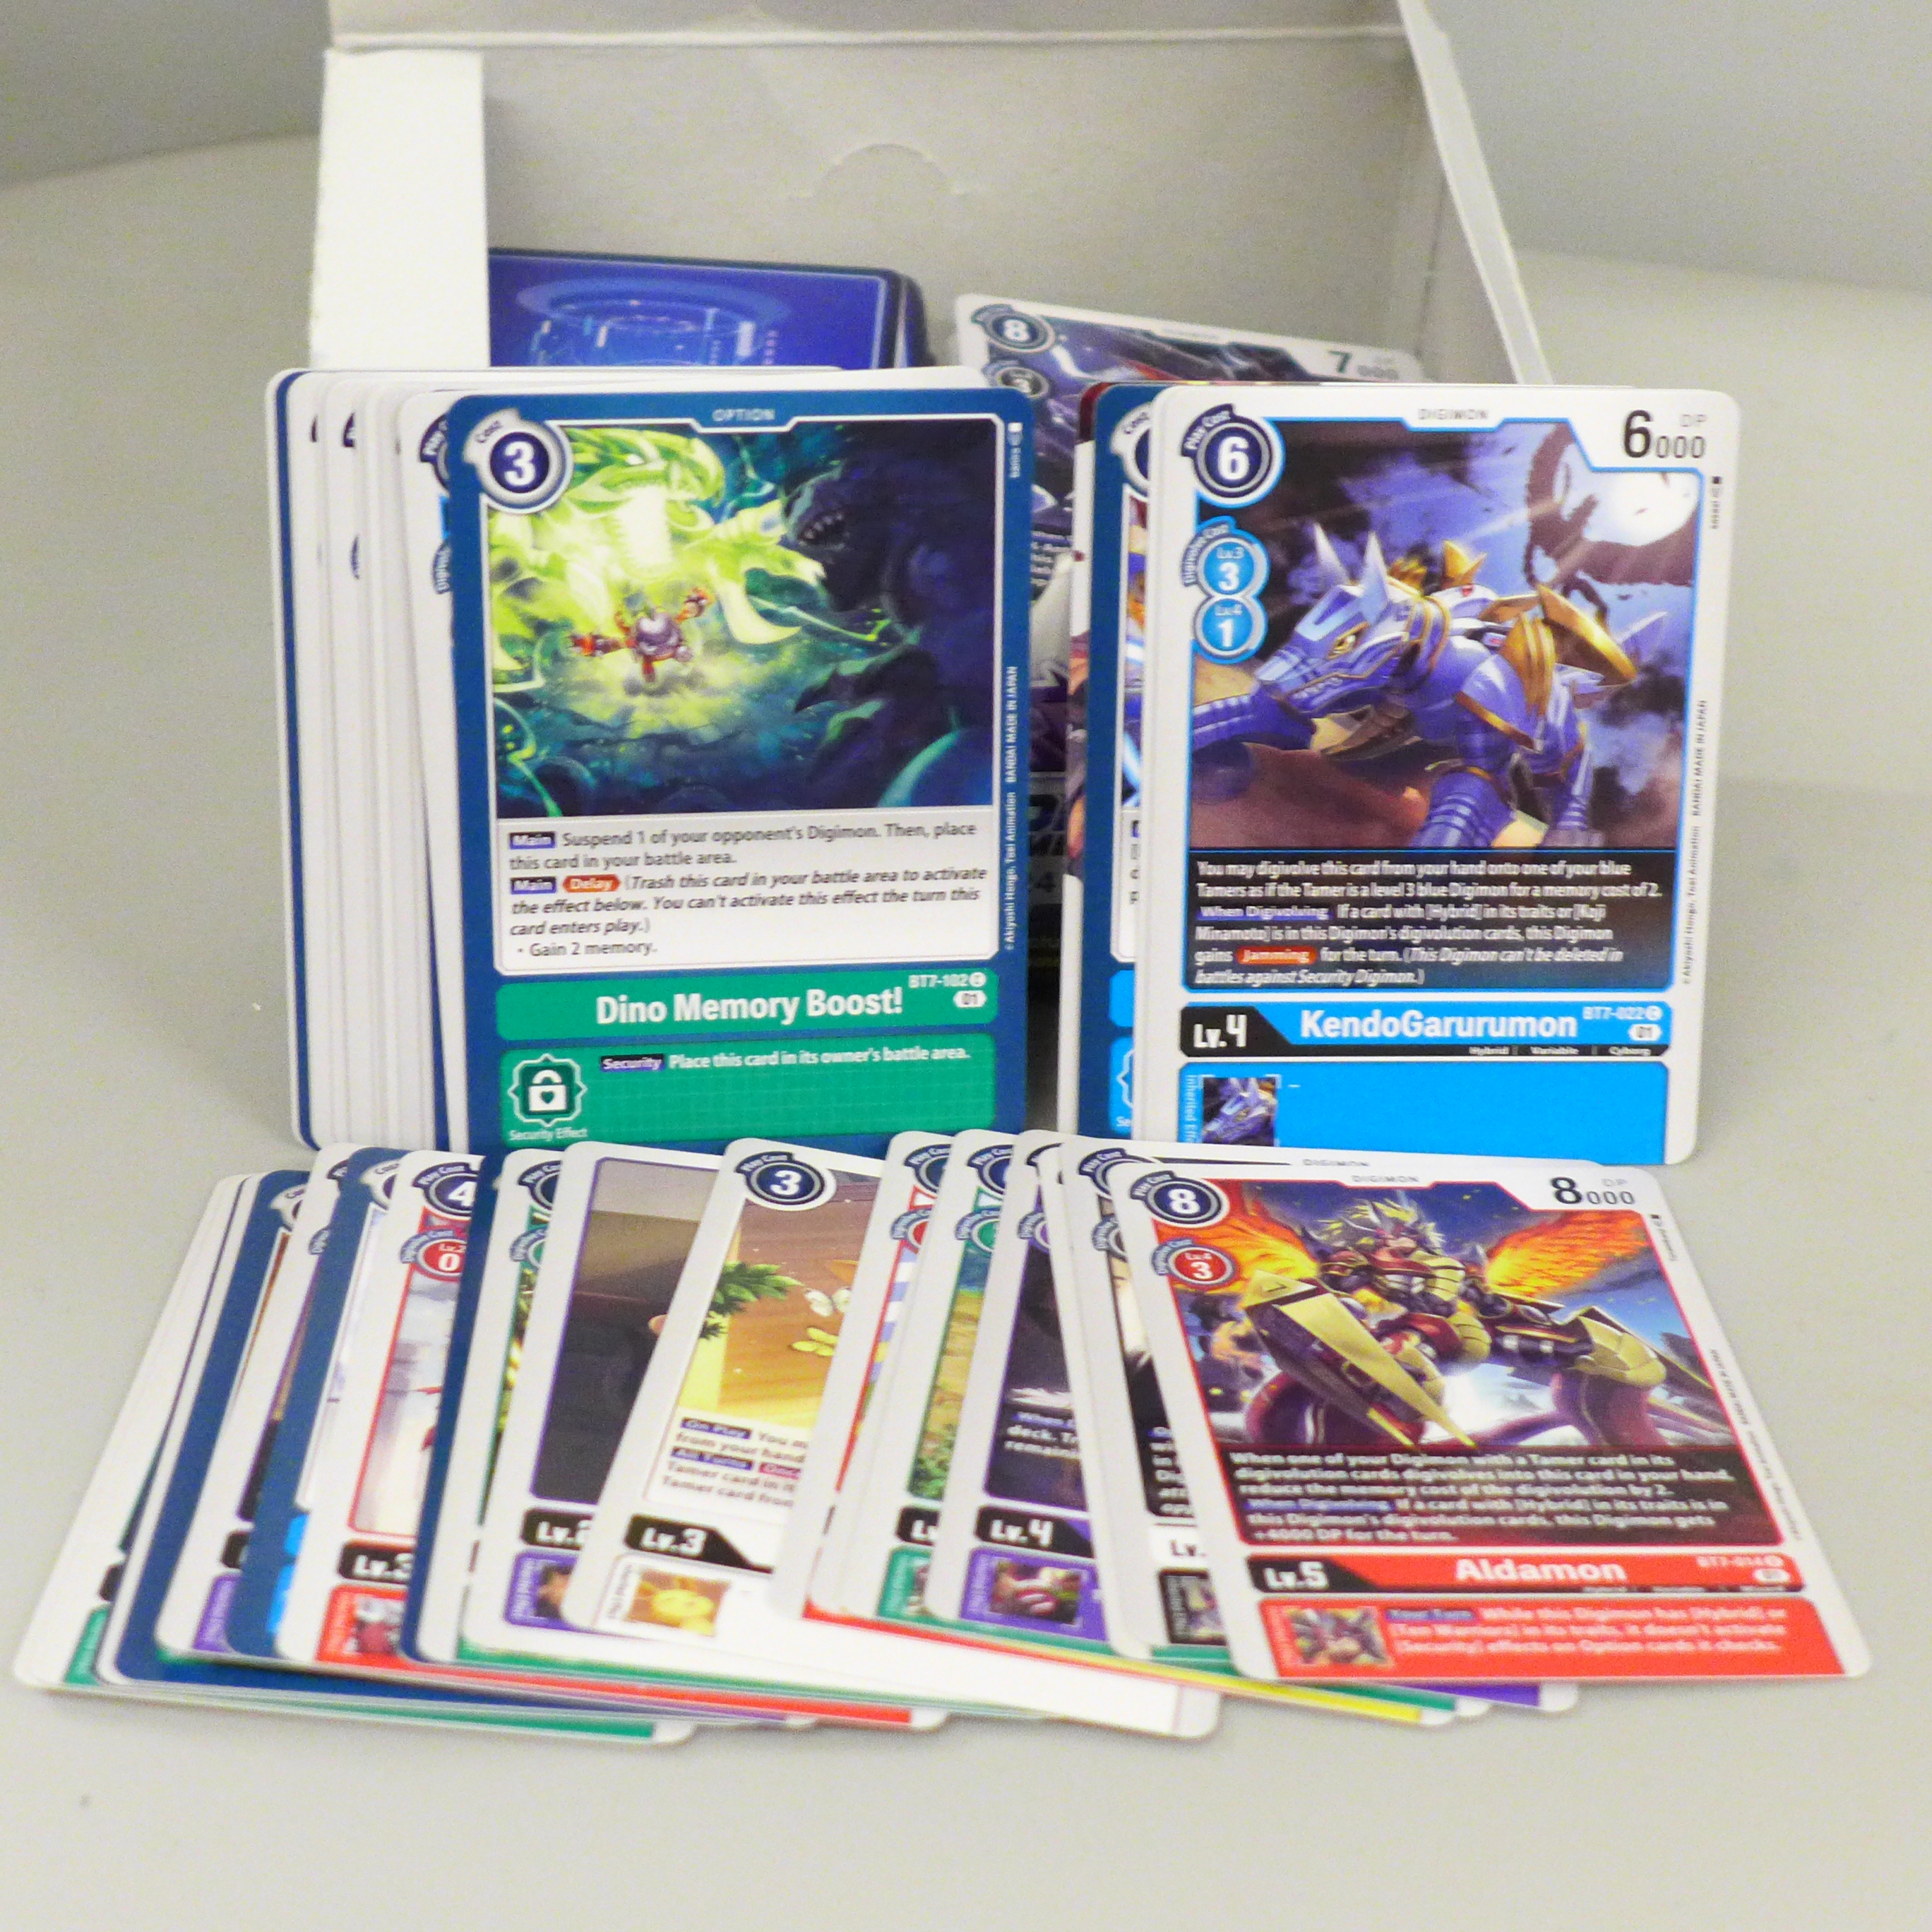 A collection of Digimon cards, with box